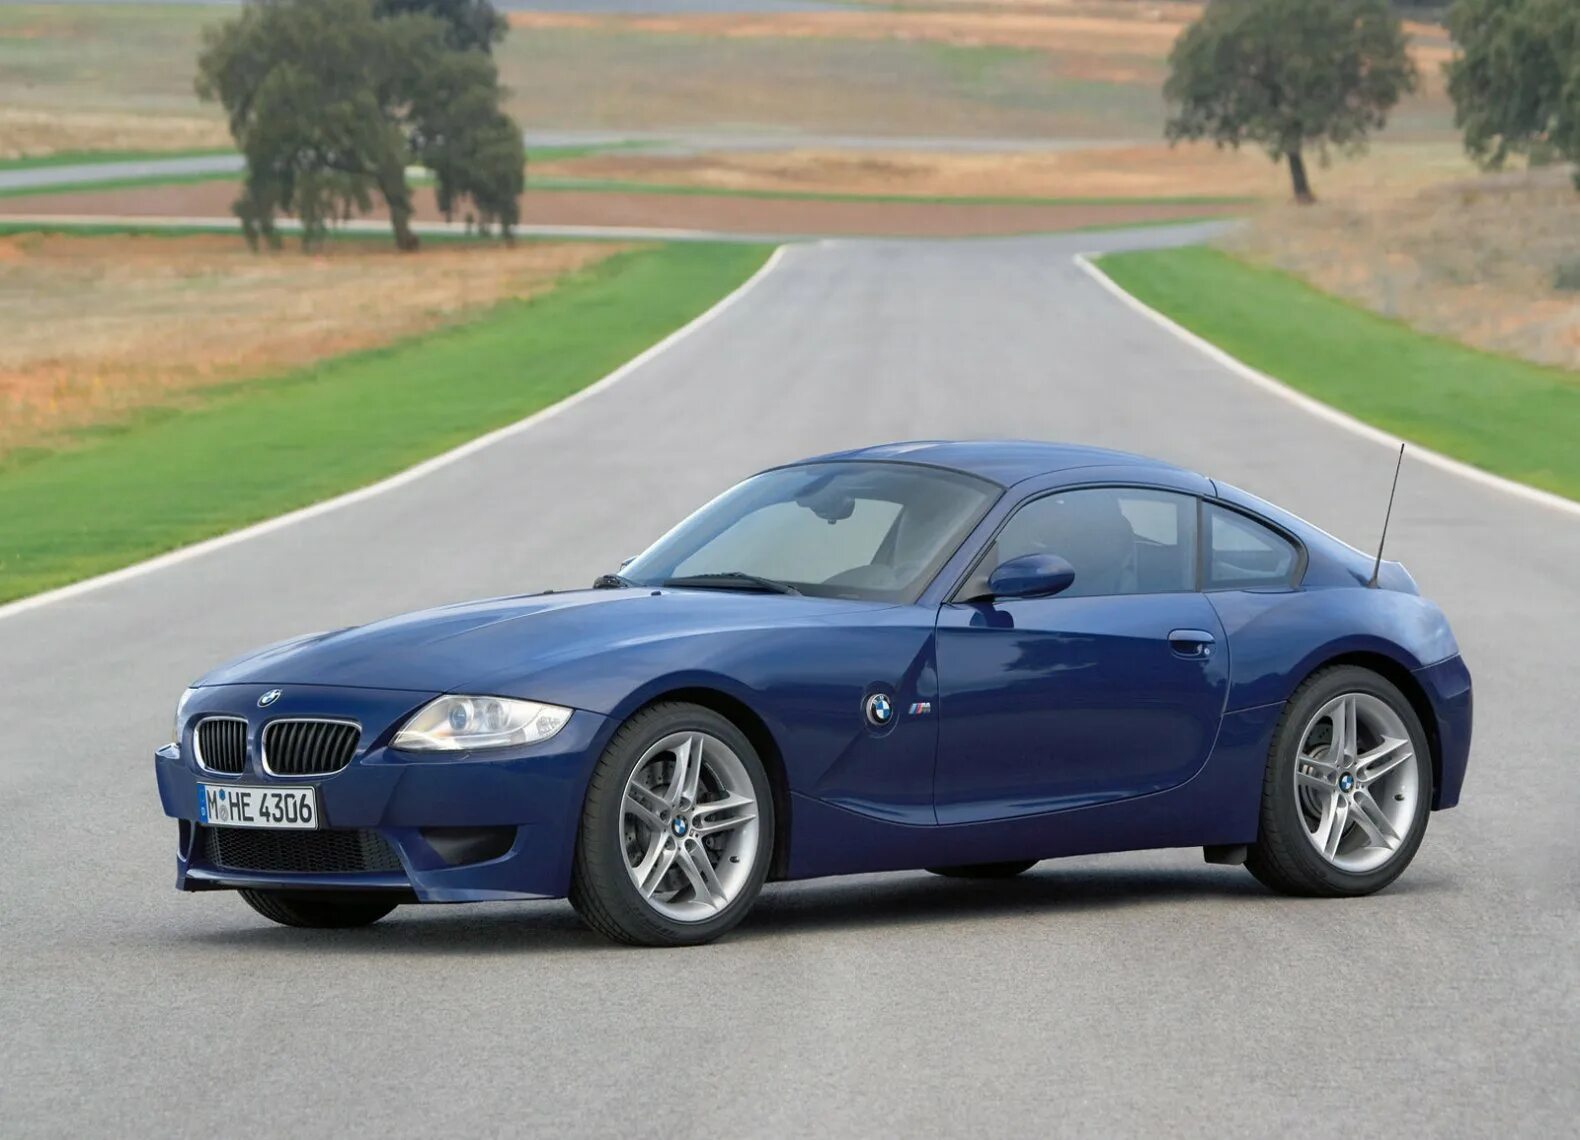 Bmw m coupe. BMW z4 Coupe. BMW z4 m Coupe. БМВ двухдверная z4. 2008 BMW z4 m Coupe.